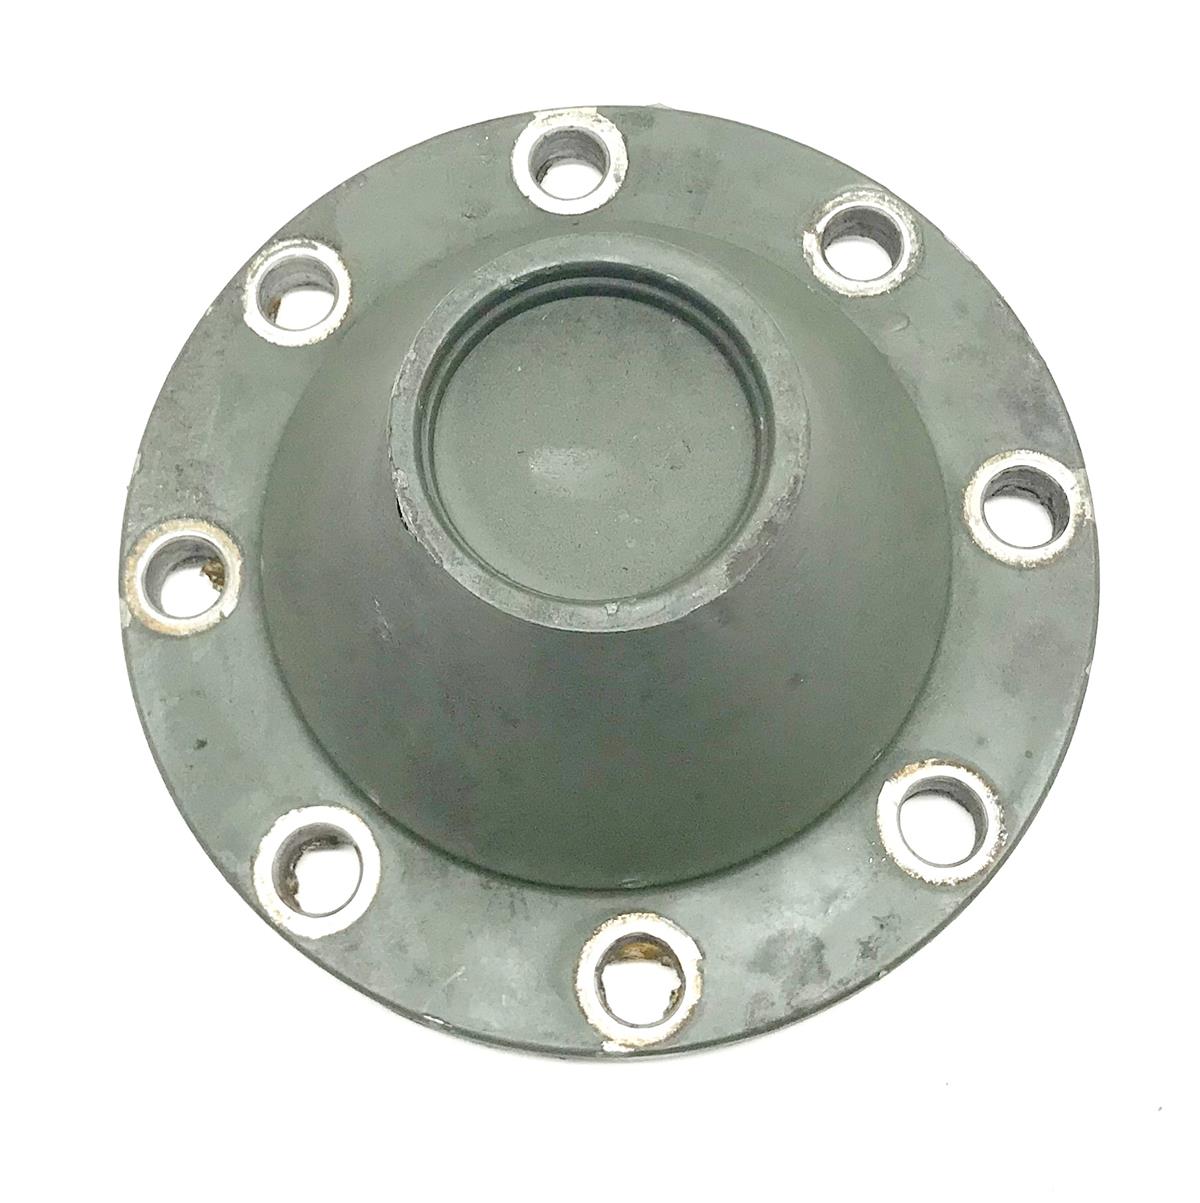 M35-719 | M35-719 M35 2.5 Ton Rockwell Front Axle Cap Cover (5).jpeg